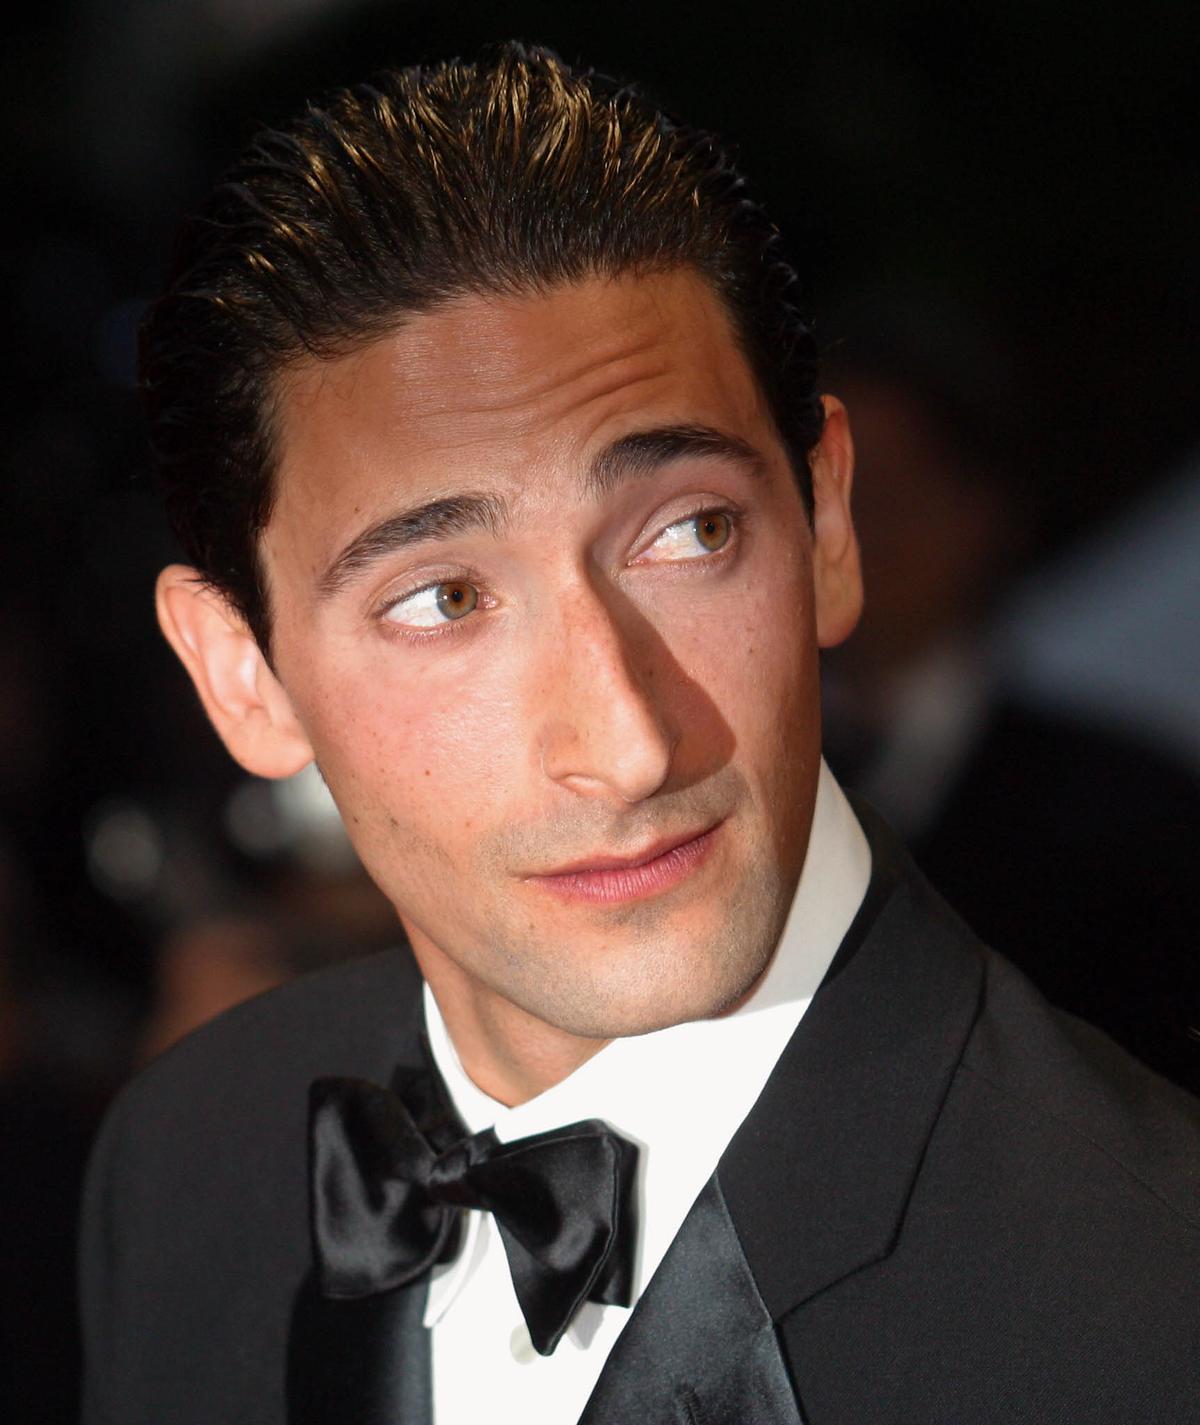 Adrien Brody, who acted the role of Wladyslaw Szpilman, arrives at the gala screening of Roman Polanski's "The Pianist" at the Cannes film festival on May 24, 2002 (Getty Images | <a href="https://www.gettyimages.com.au/detail/news-photo/actor-adrien-brody-arrives-at-the-gala-screening-of-polish-news-photo/51527286">ANNE-CHRISTINE POUJOULAT/AFP</a>)